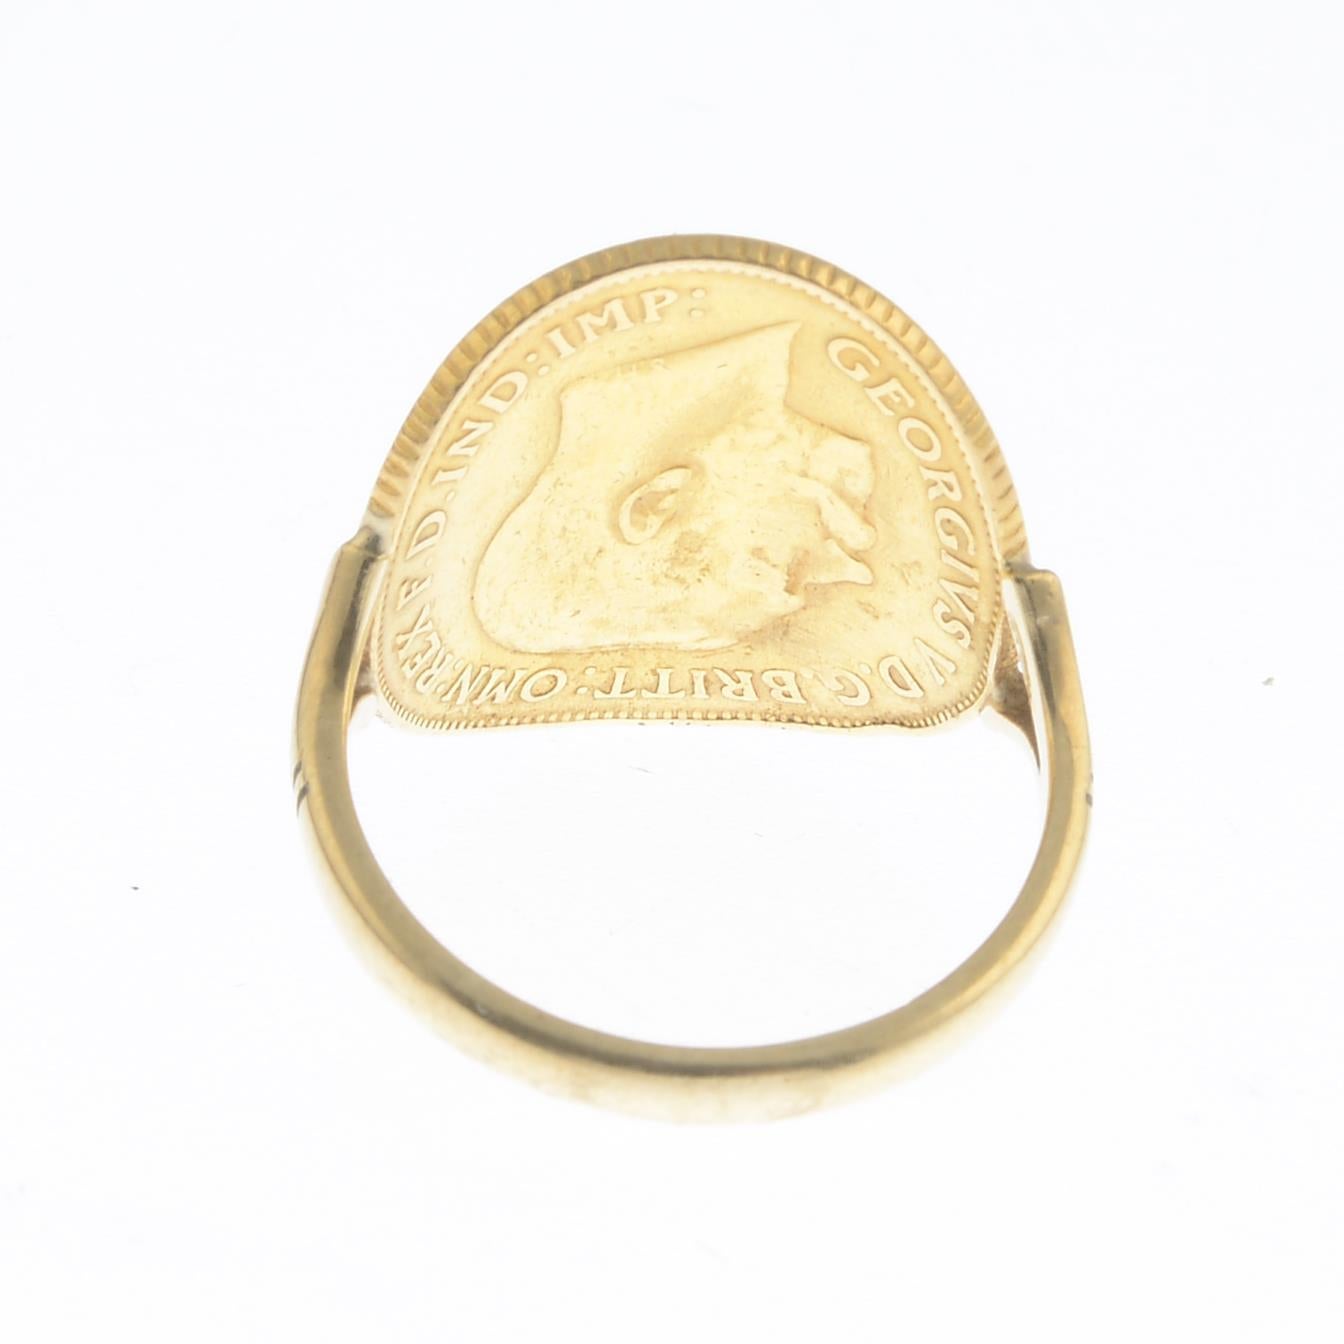 Ring size 6 1/4. Total weight 5gms.
Diameter of coin 19.4mms.
Coin electronically tested as 22ct gold.
Band electronically tested as 9ct gold. 